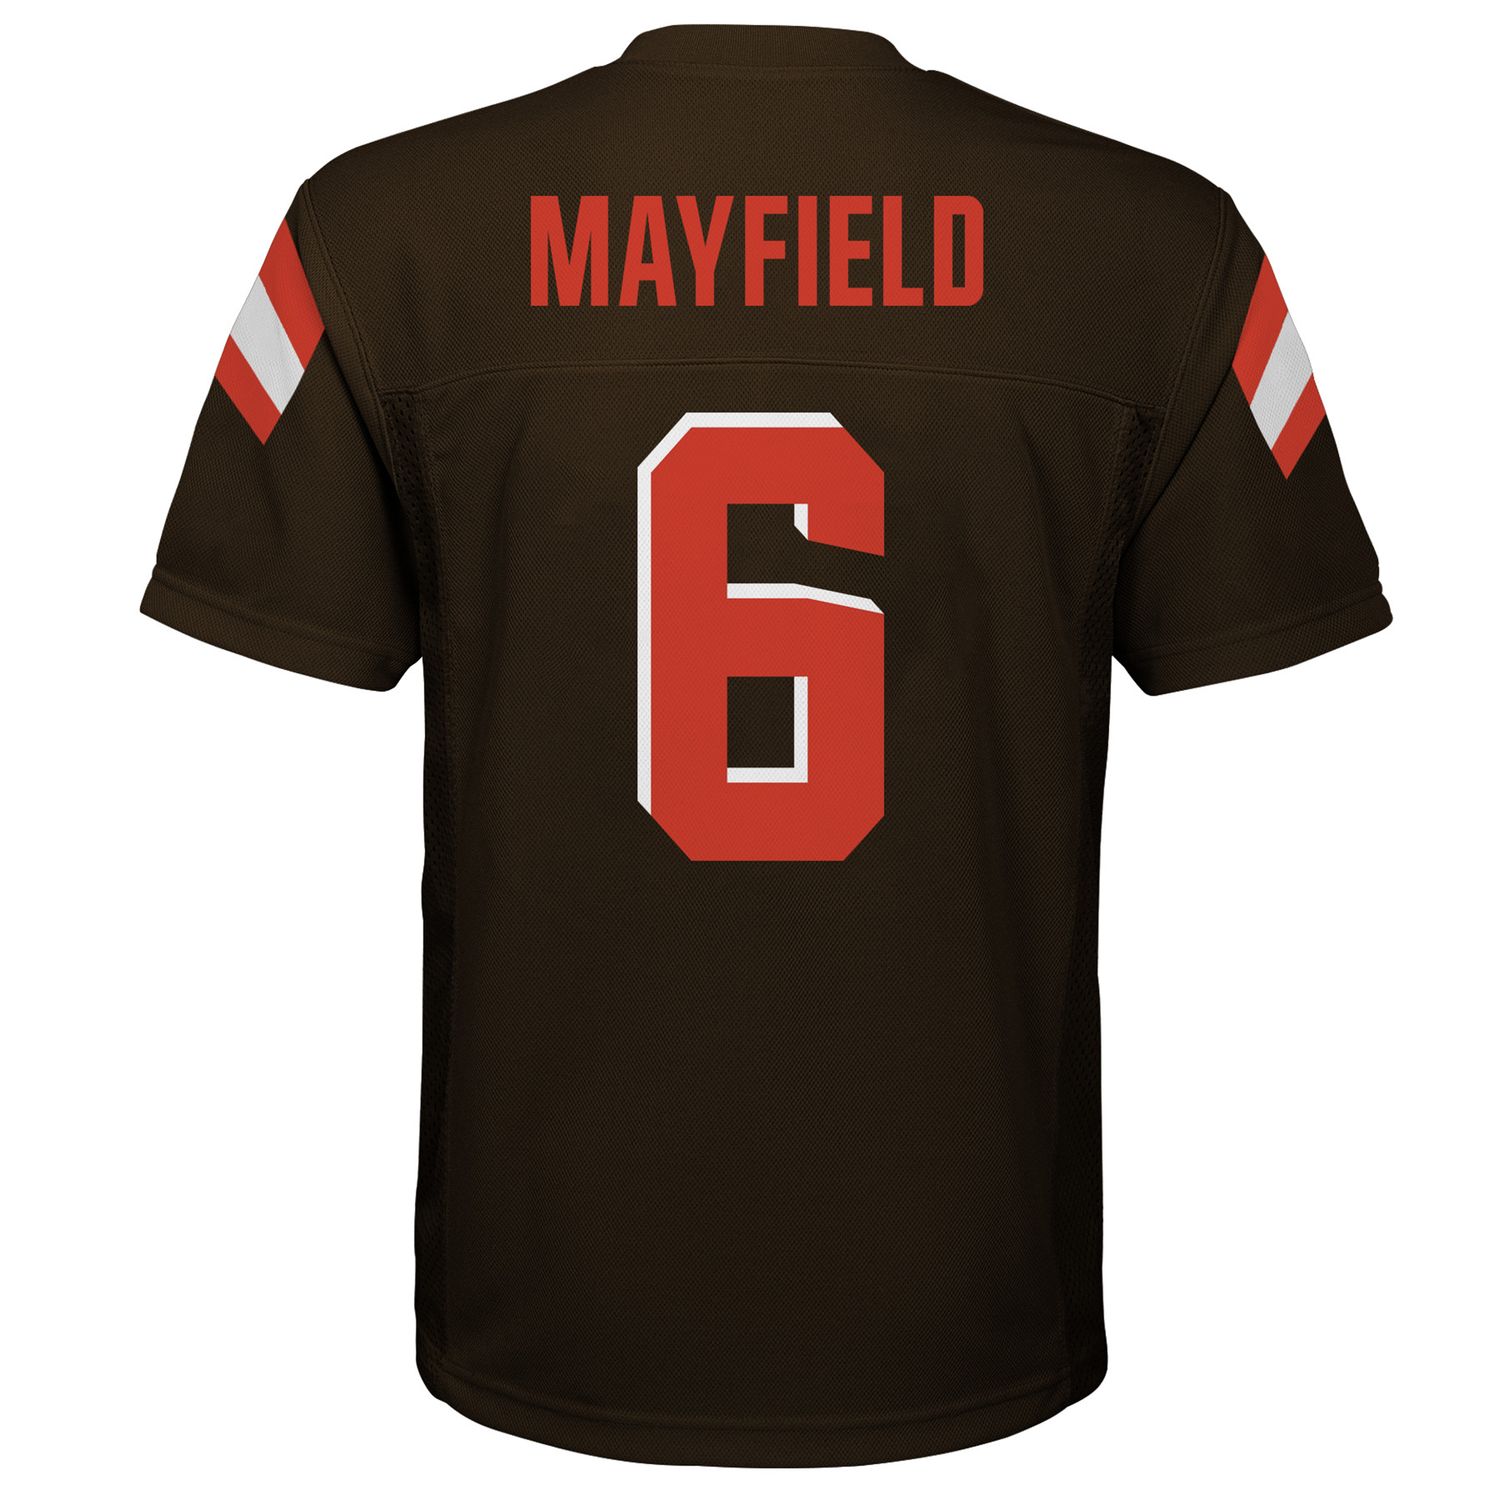 cleveland browns jersey near me